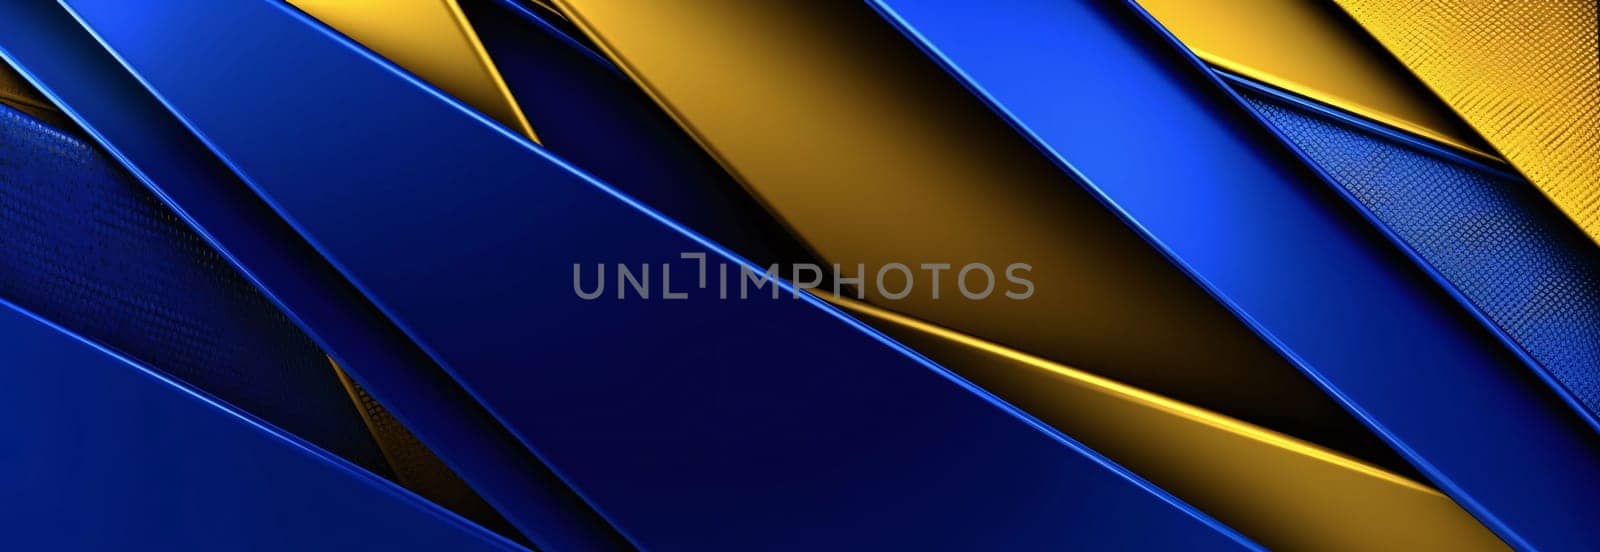 Abstract blue and yellow metallic background. 3D illustration. 3D CG. High resolution by ThemesS